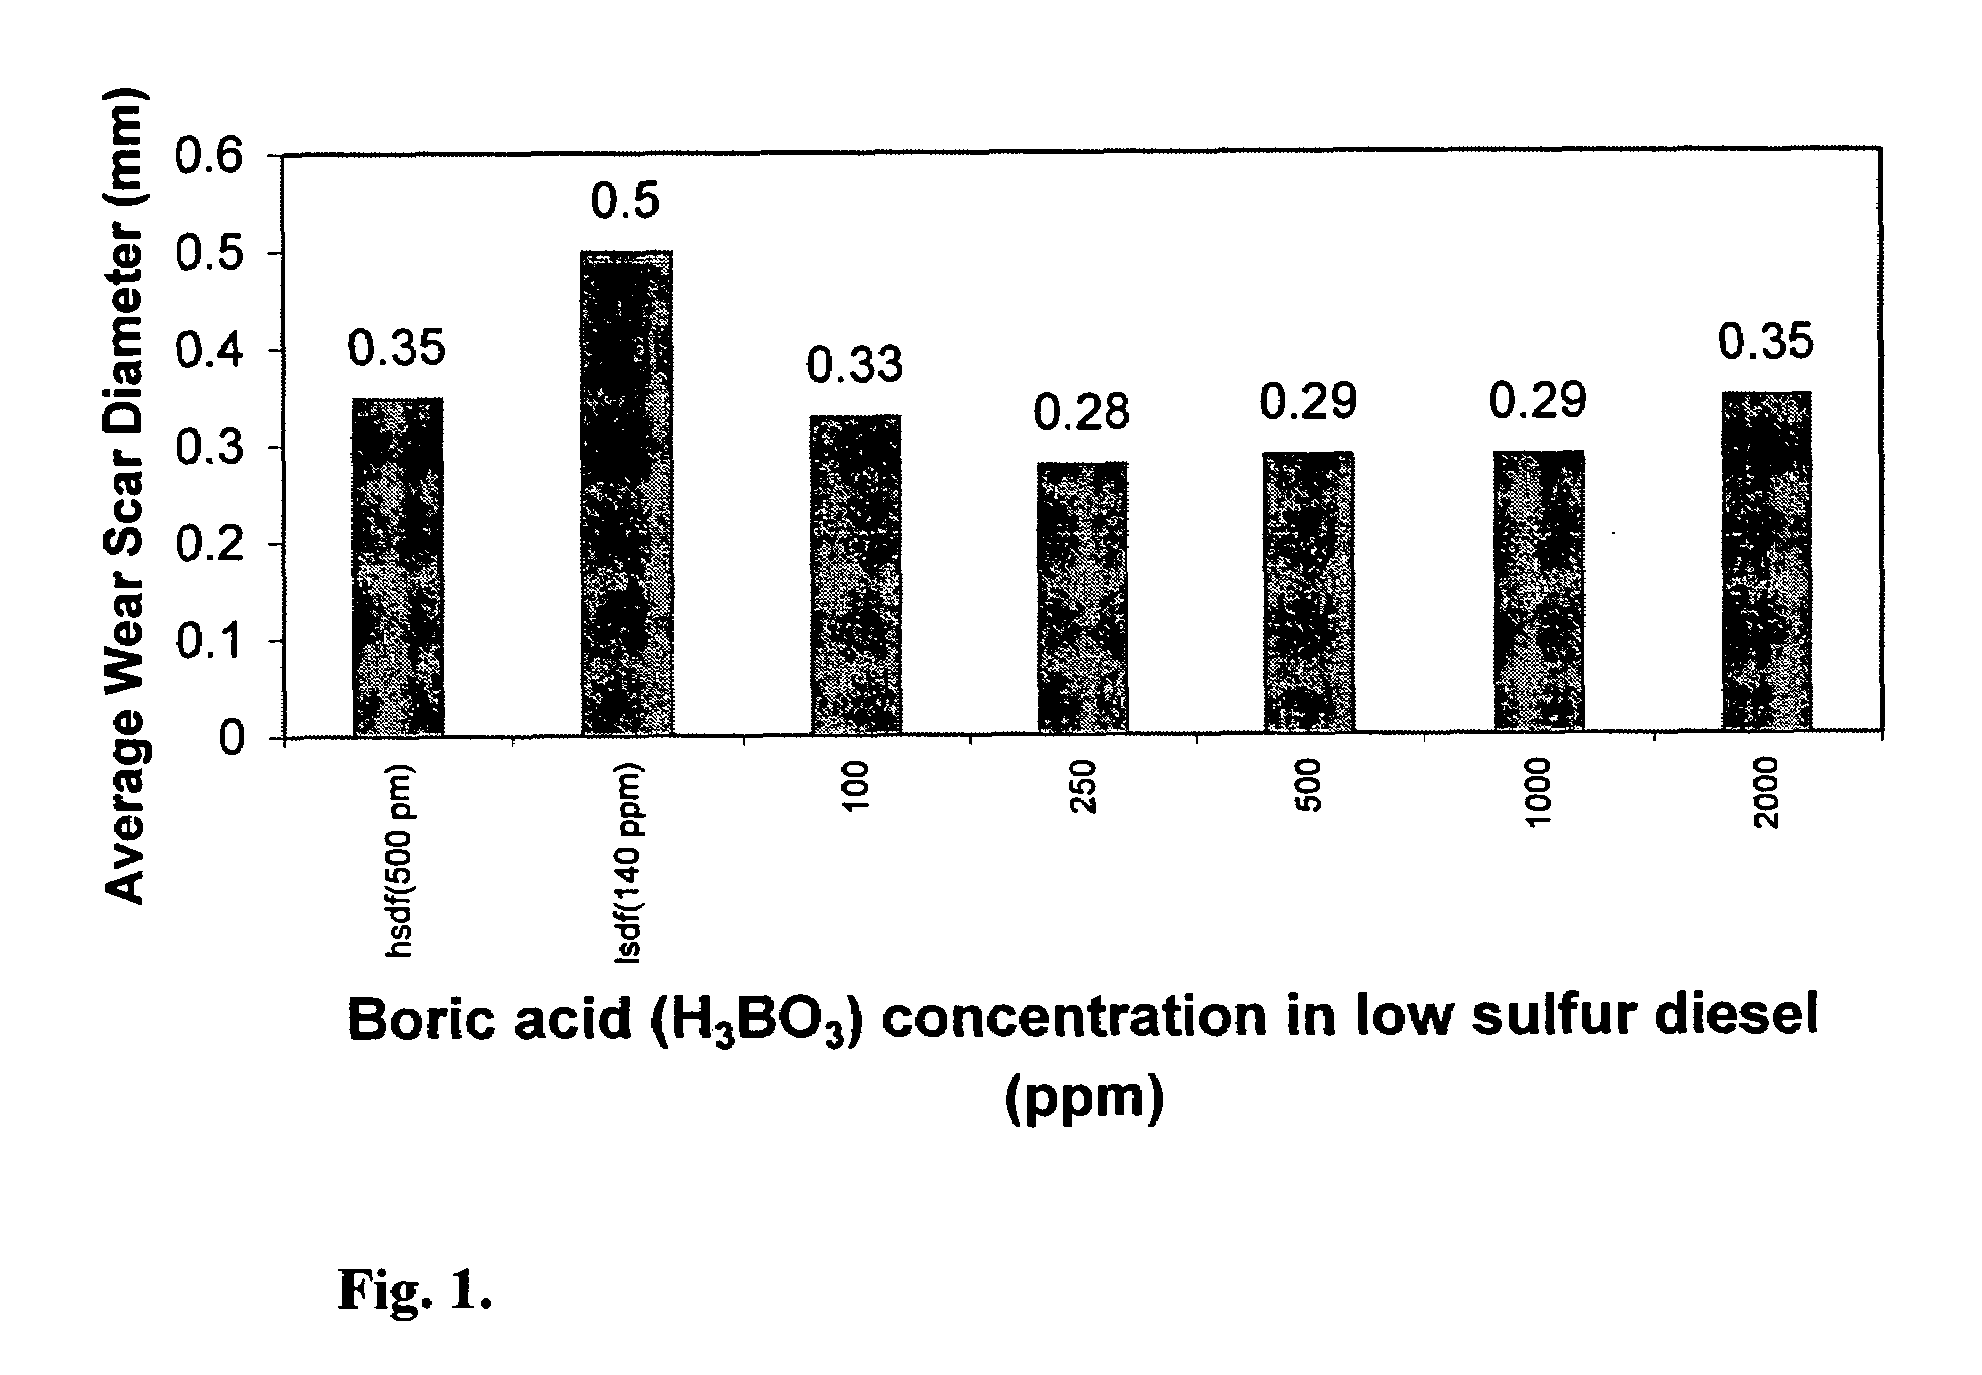 Methods to improve lubricity of fuels and lubricants